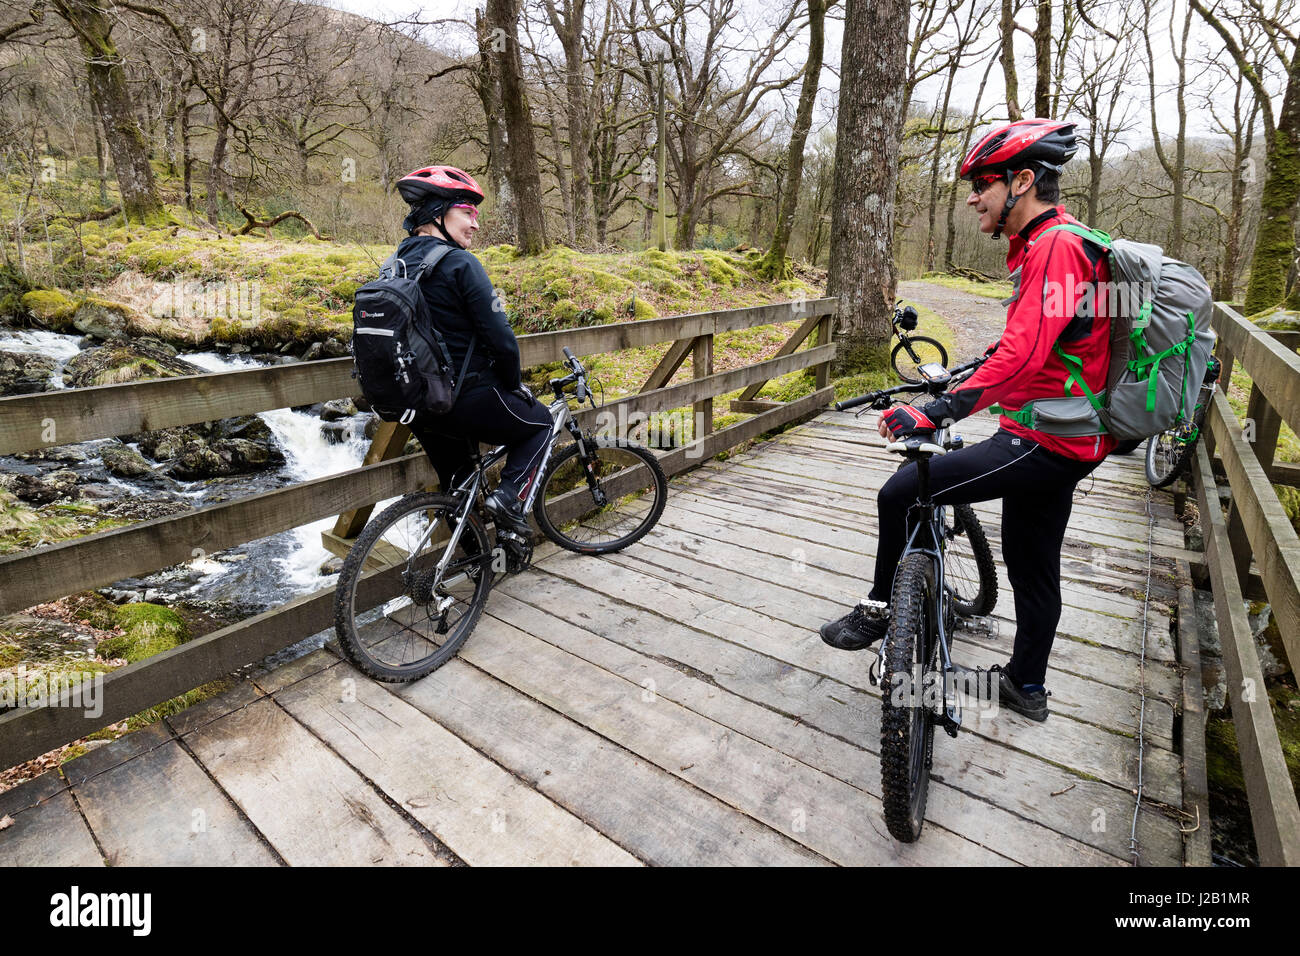 Two Mountain Bikers Taking a Break on the National Cycle Route 7 in Glen Trool, Galloway Hills, Scotland. Stock Photo